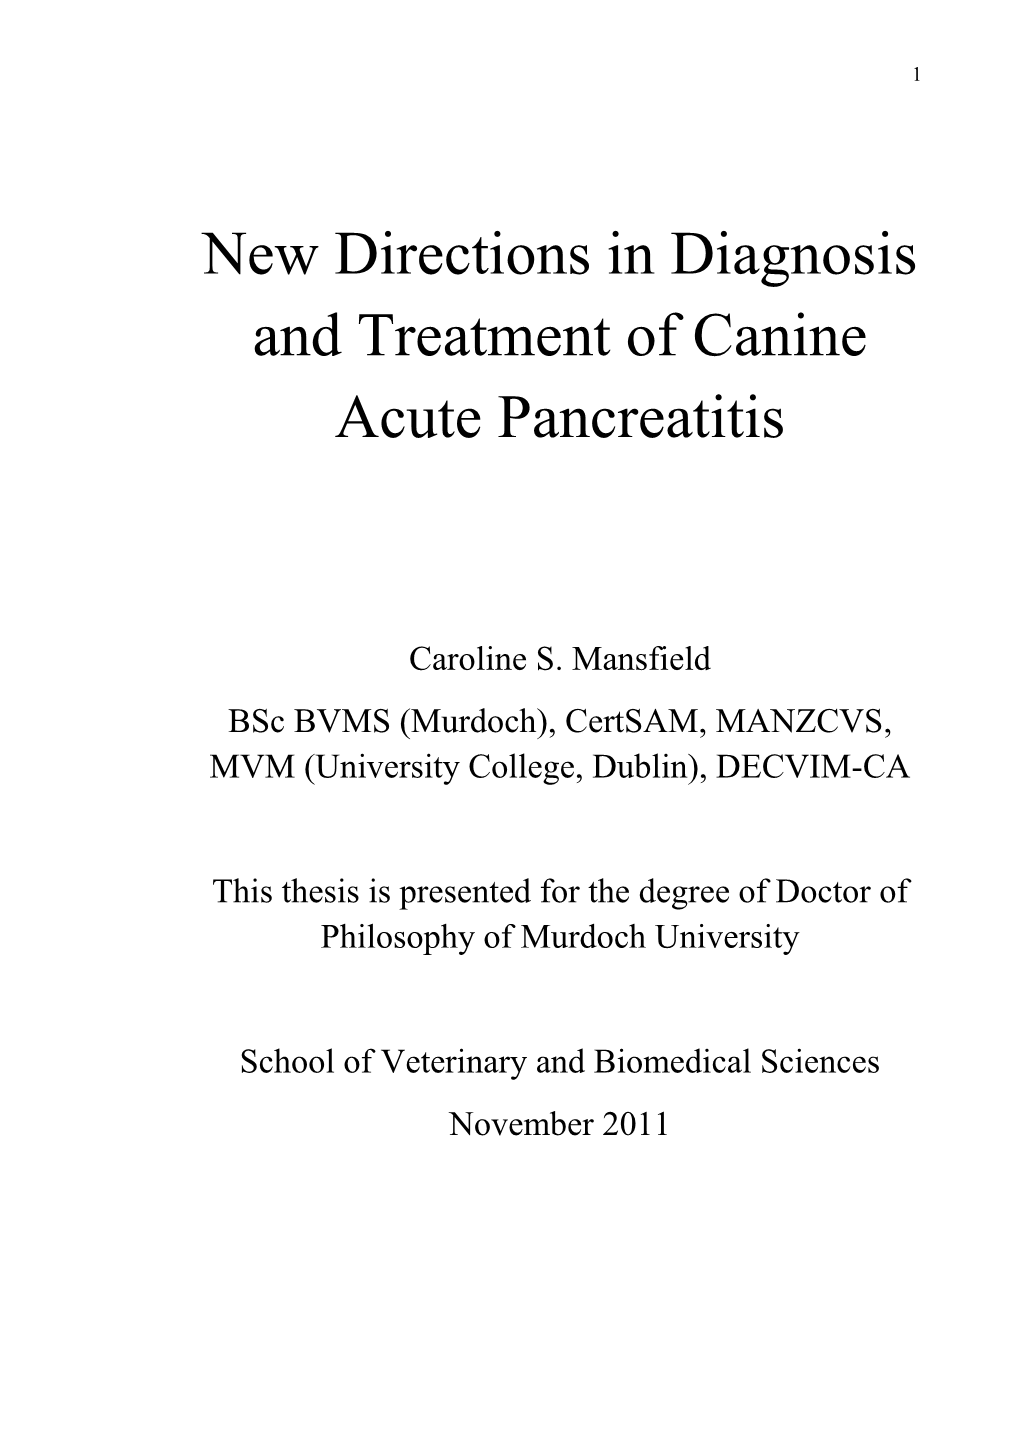 New Directions in Diagnosis and Treatment of Canine Acute Pancreatitis